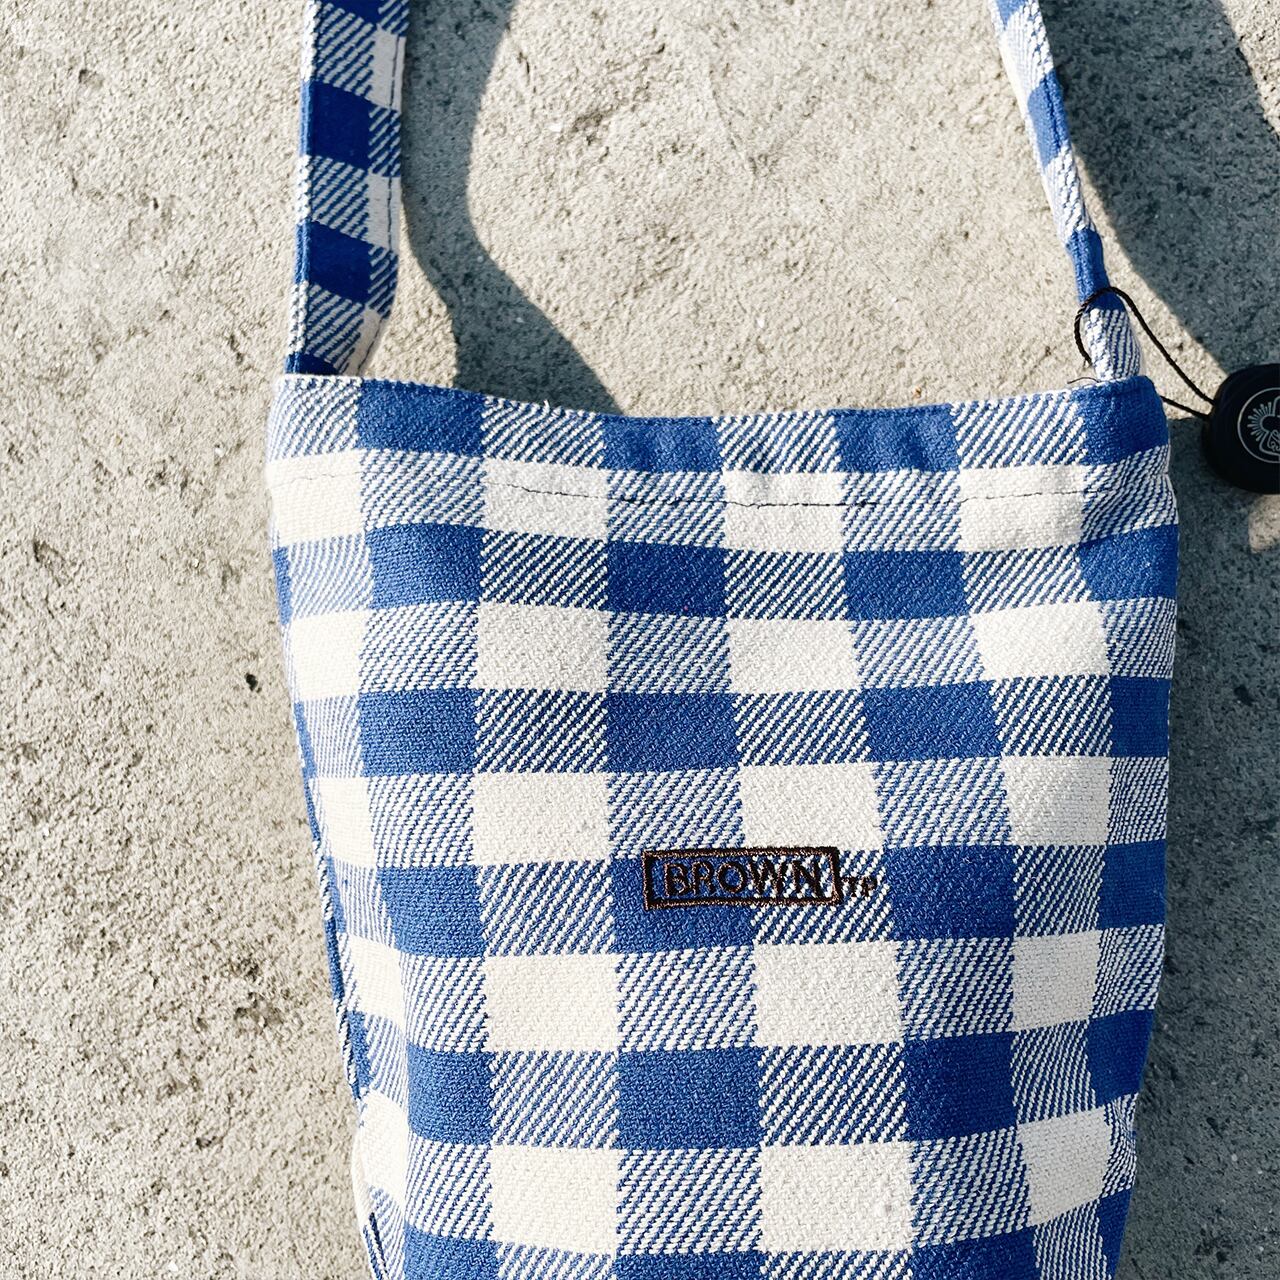 【THEATRE PRODUCTS】Gingham check mini tote